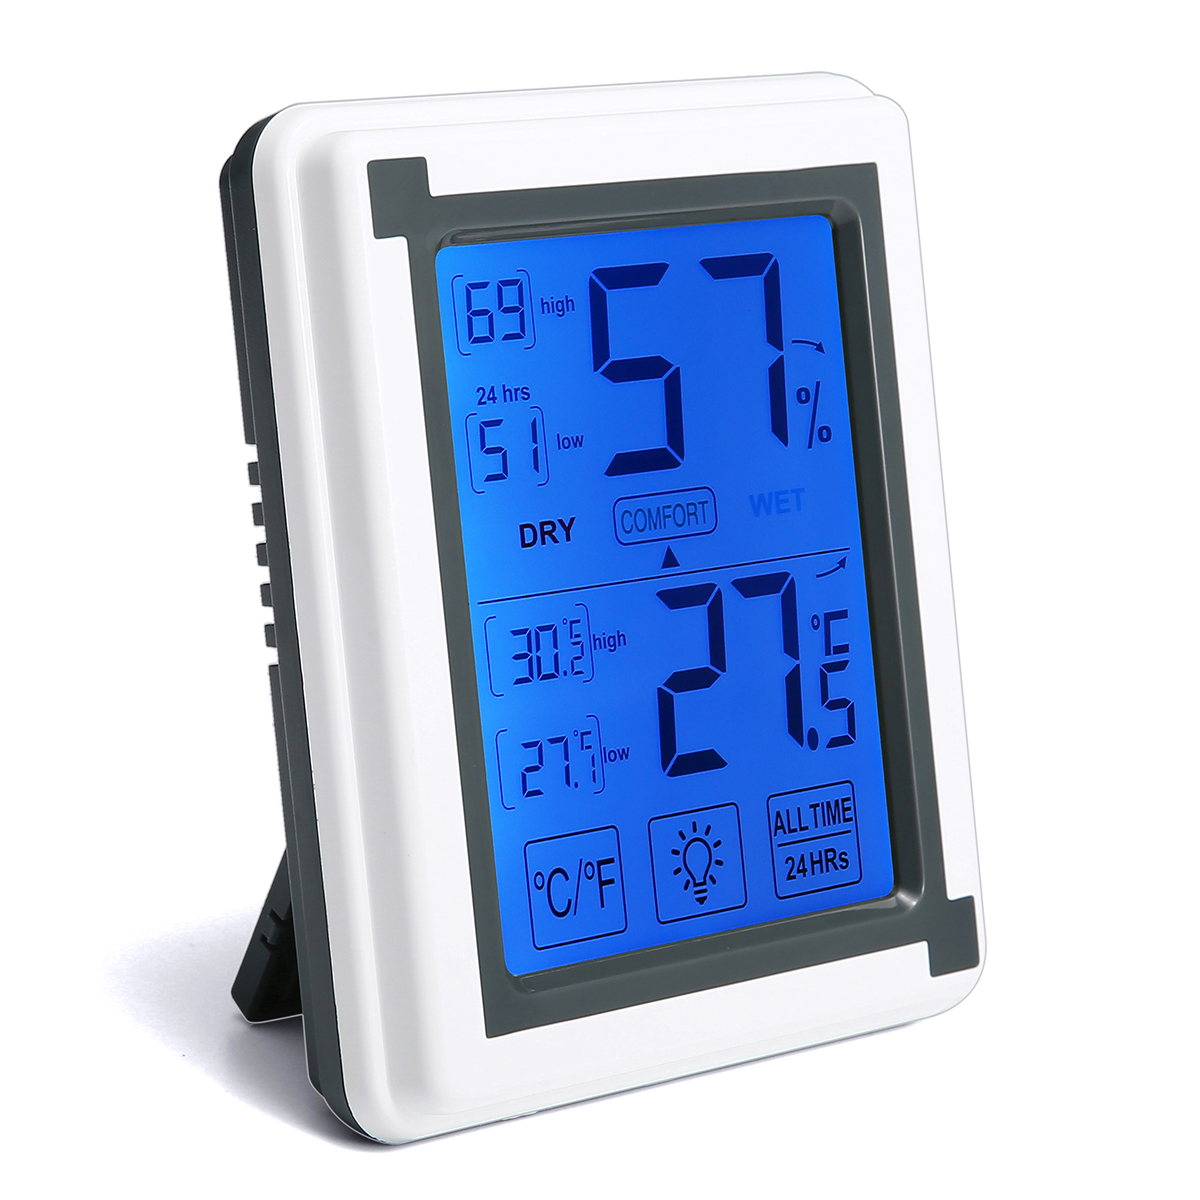 

Loskii Digital Hygrometer Indoor Thermometer Humidity Monitor LCD Touch Screen Backlight Clock